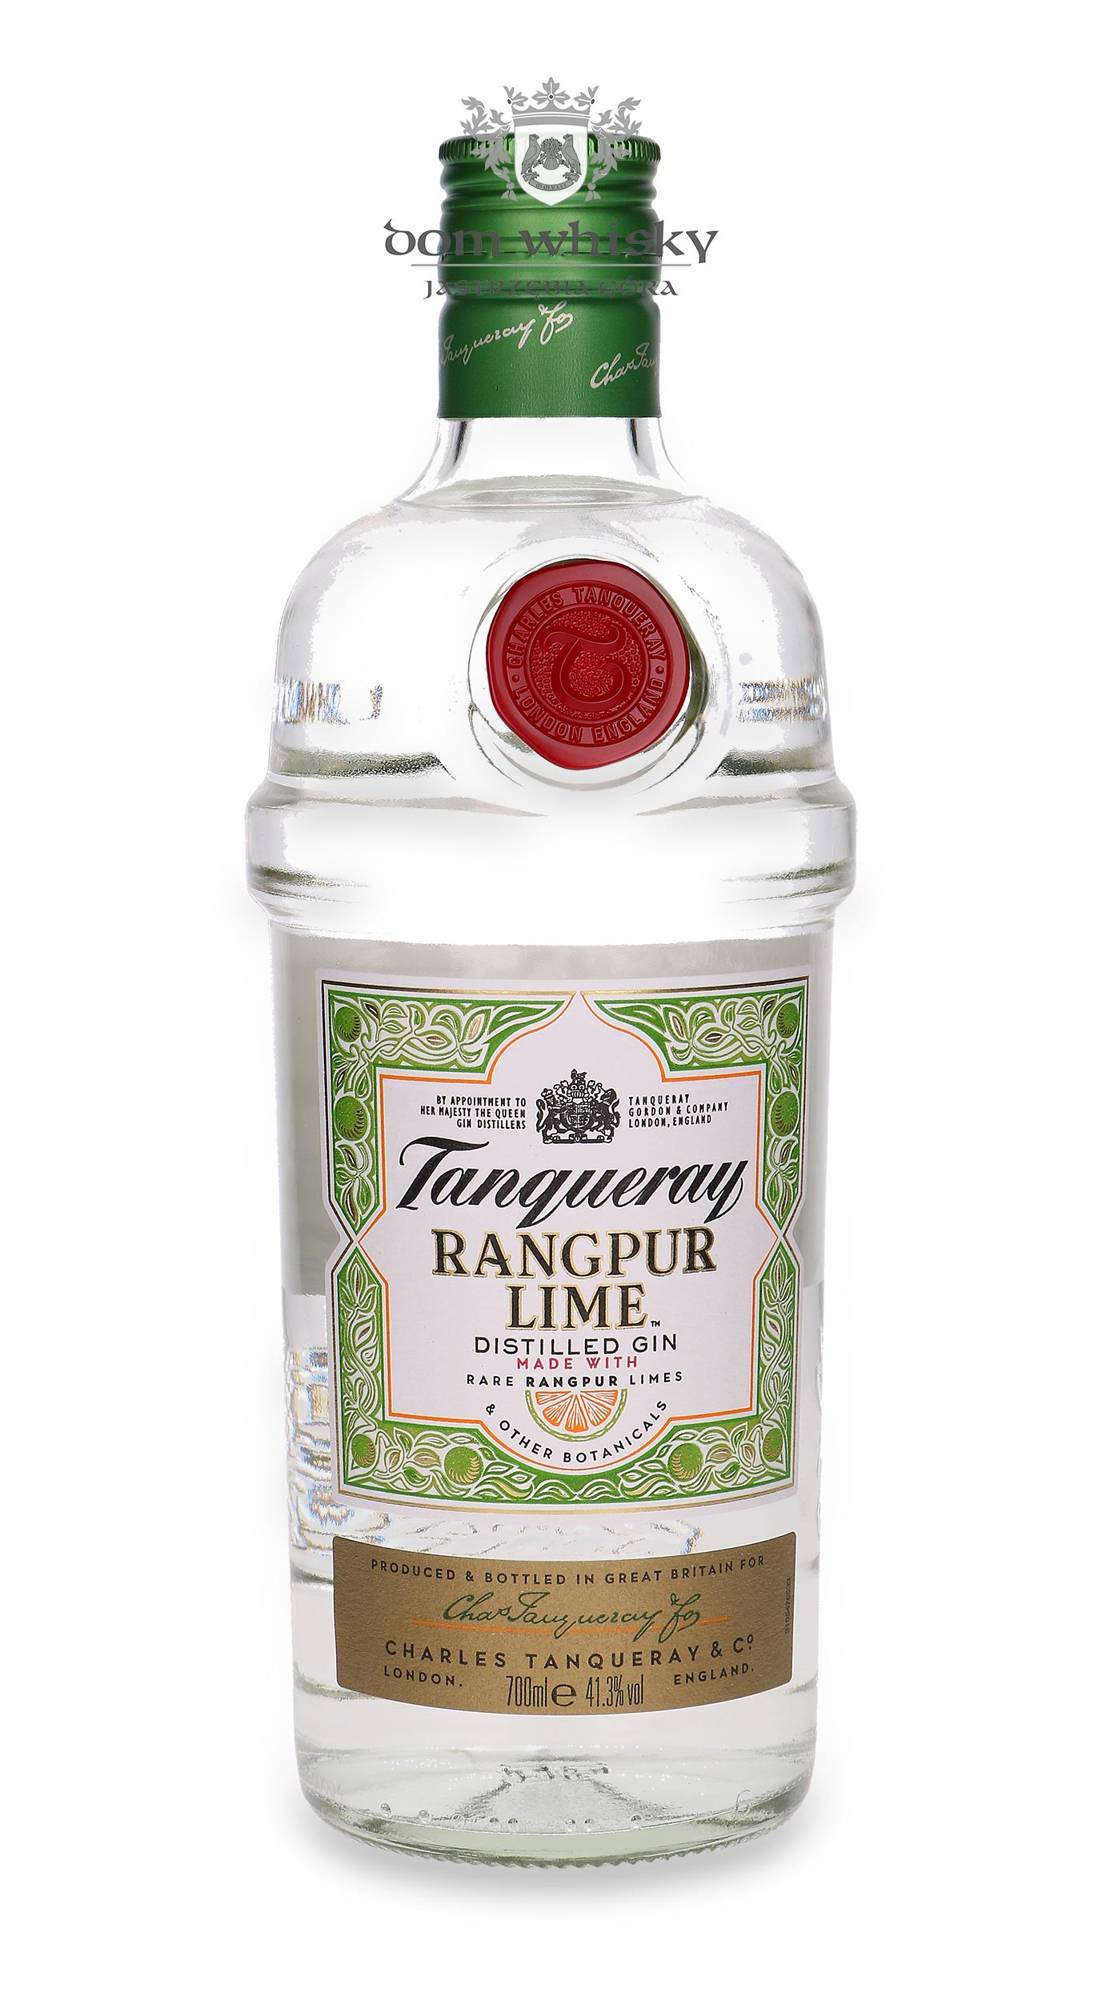 Dom / | Lime Whisky Tanqueray 41,3% Rangpur / 0,7l